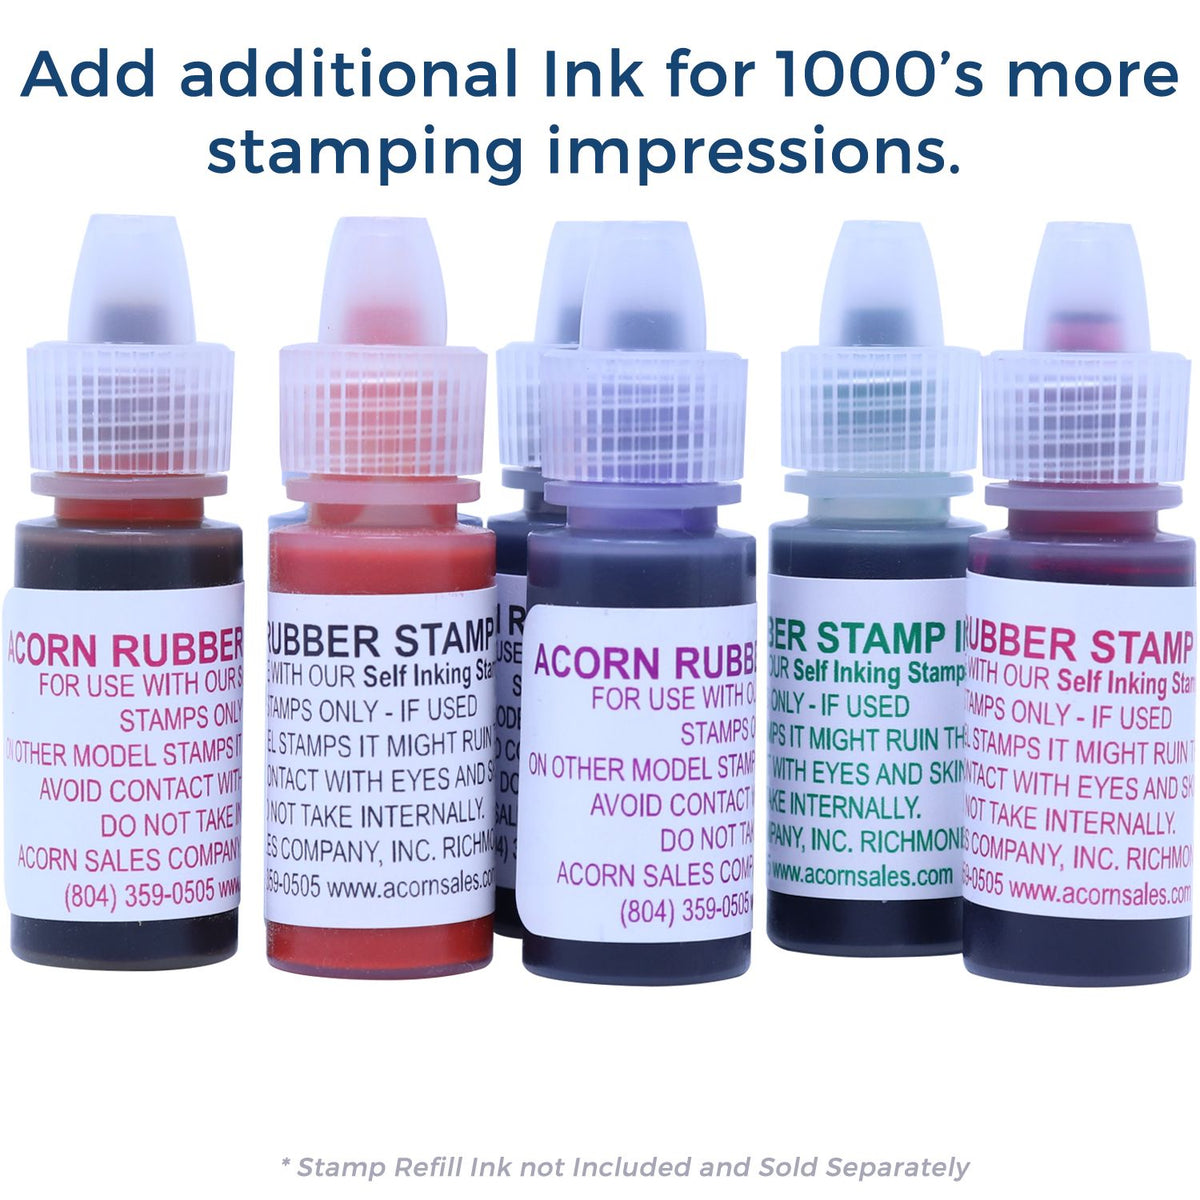 Refill Ink for Self-Inking Round Correct and Return Stamp Available